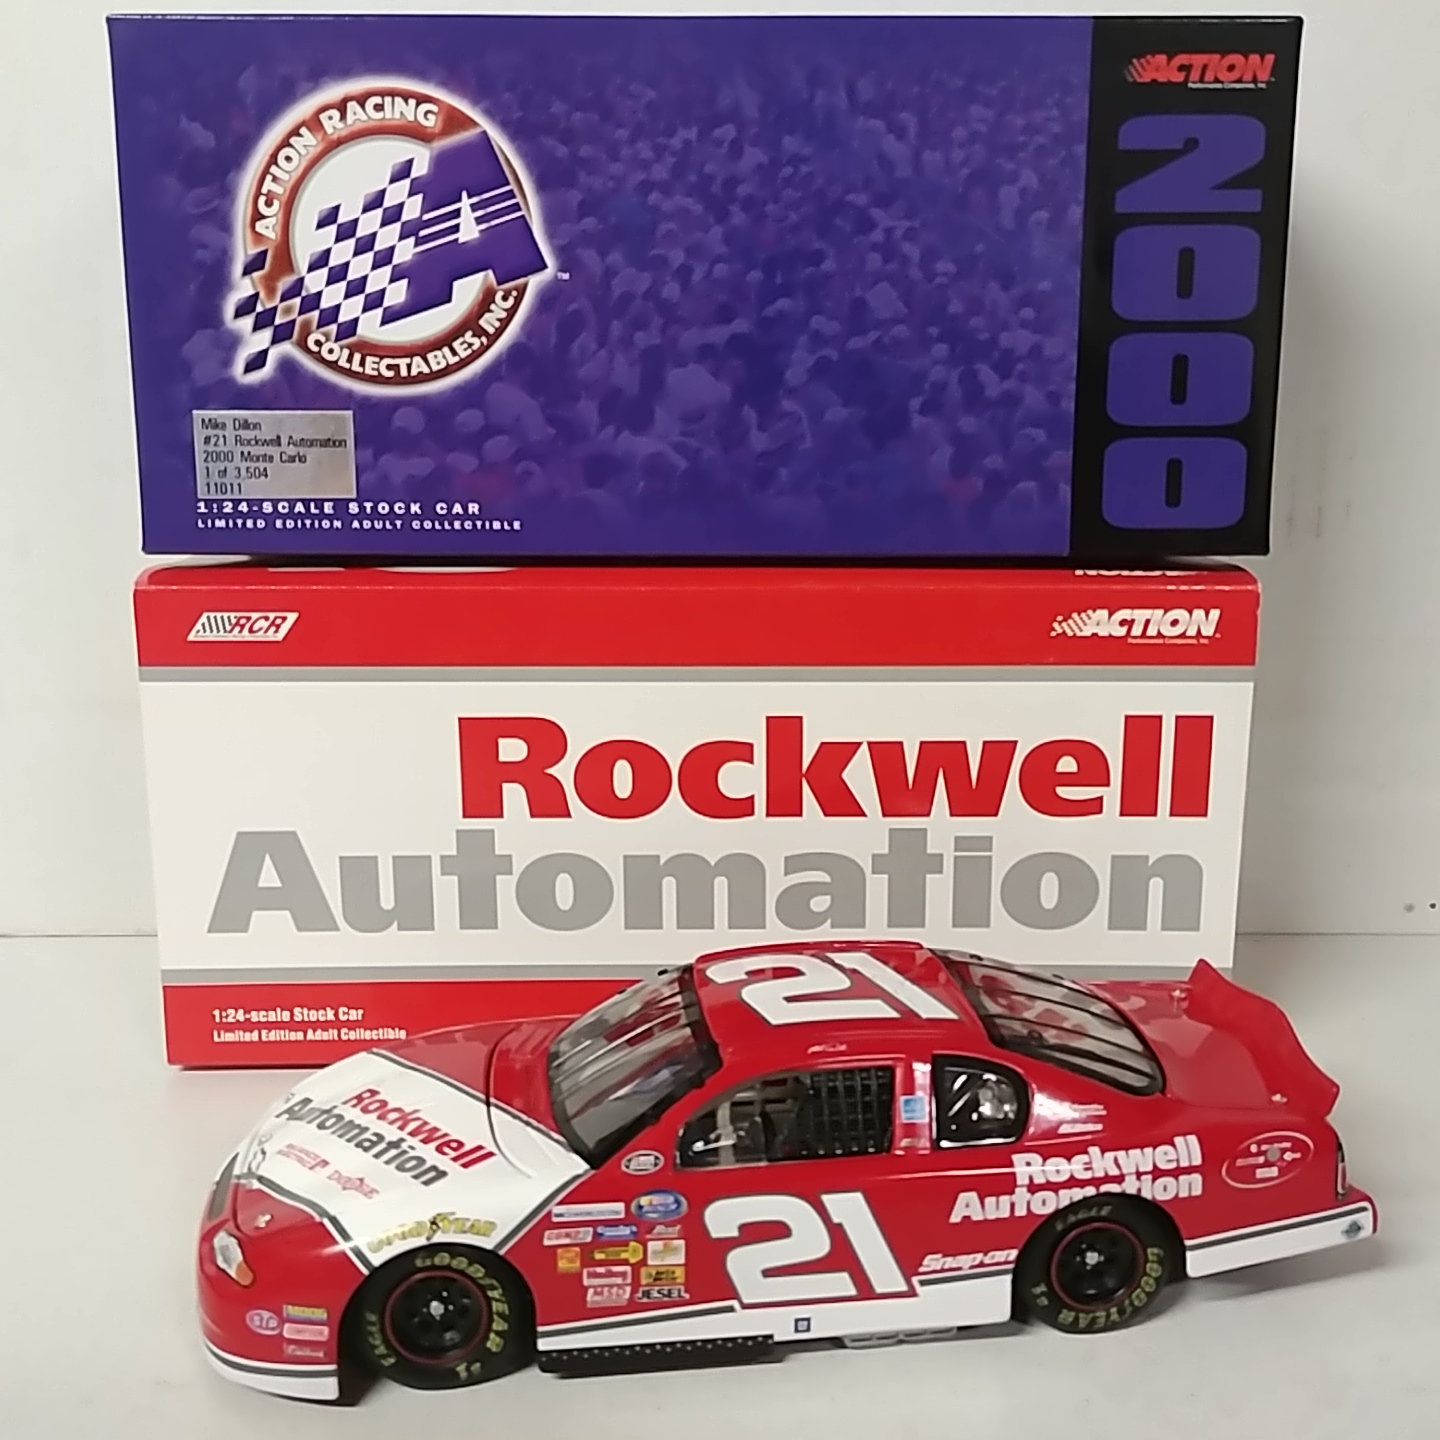 2000 Mike Dillon 1/24th Rockwell c/w car